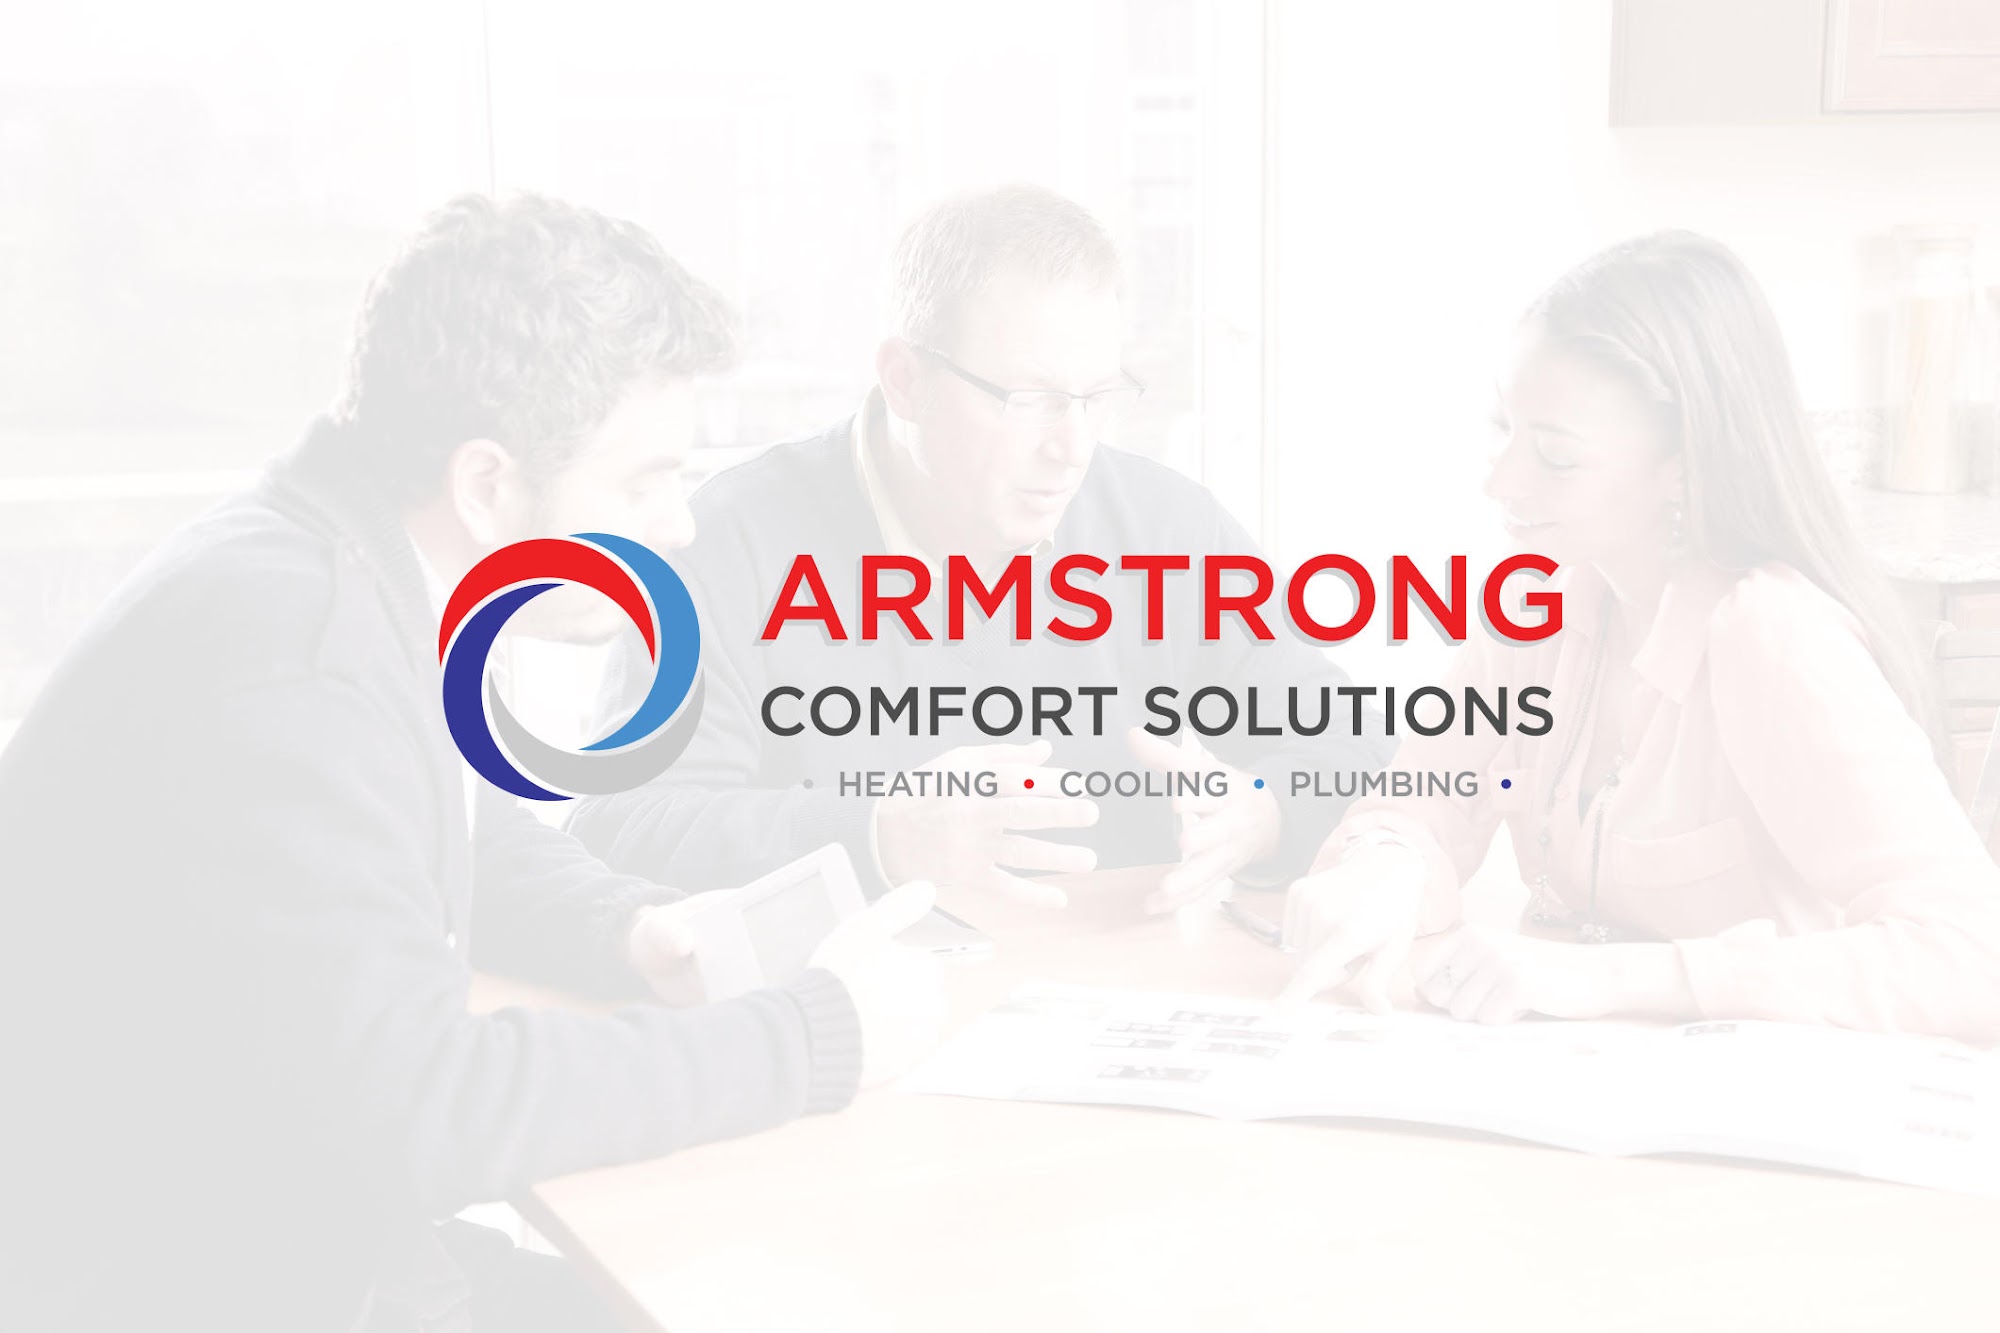 Armstrong Comfort Solutions 174 Thorn Hill Rd, Warrendale Pennsylvania 15086